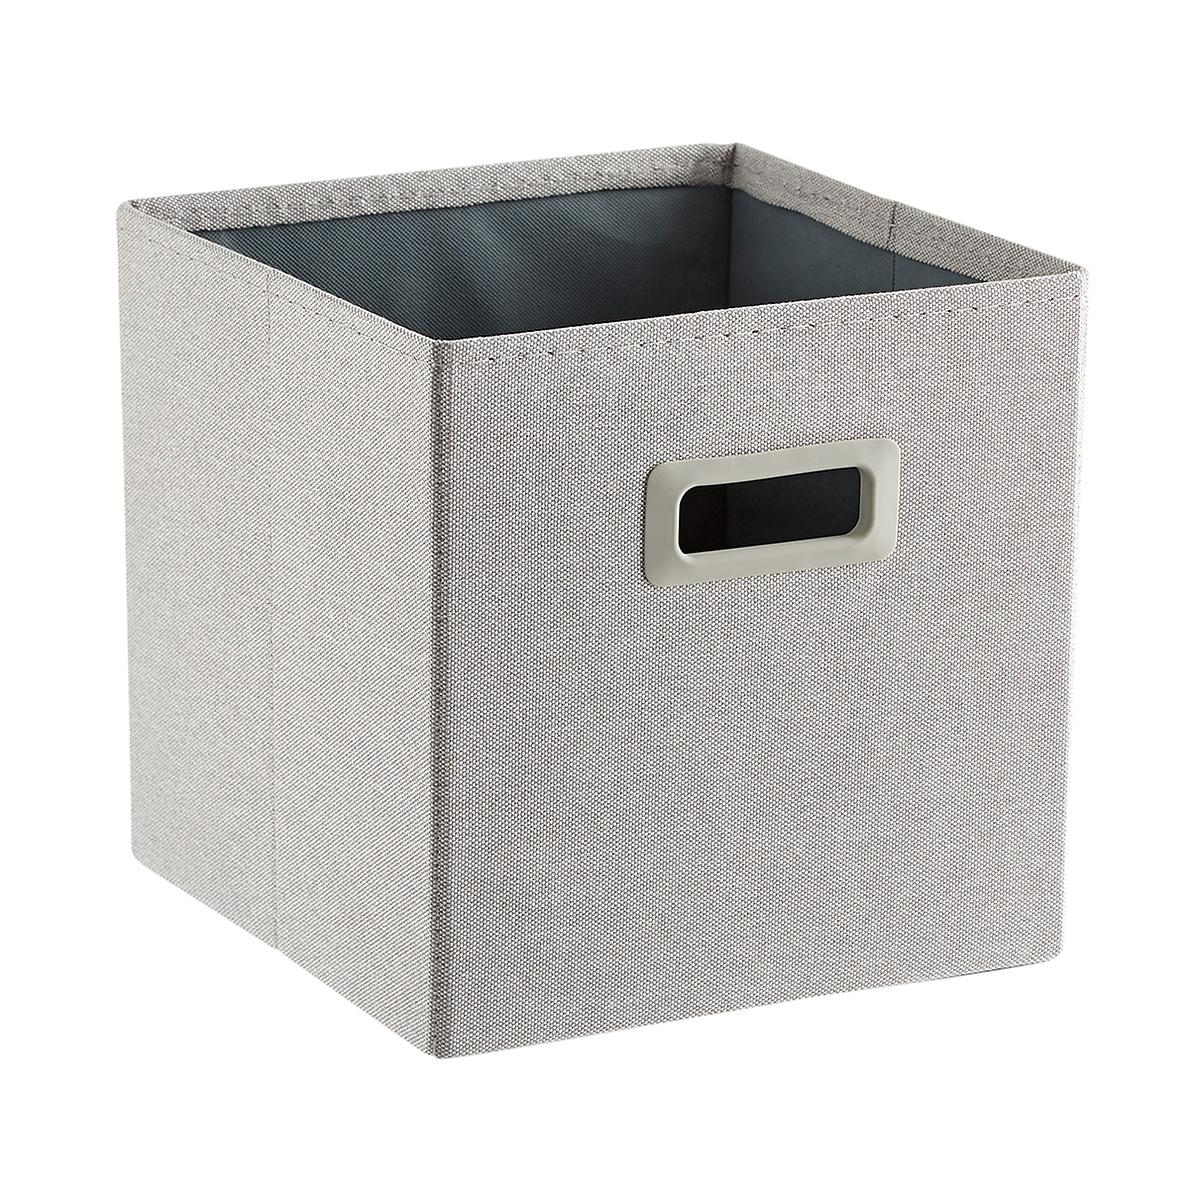 Poppin 2x2 Storage Cube | The Container Store